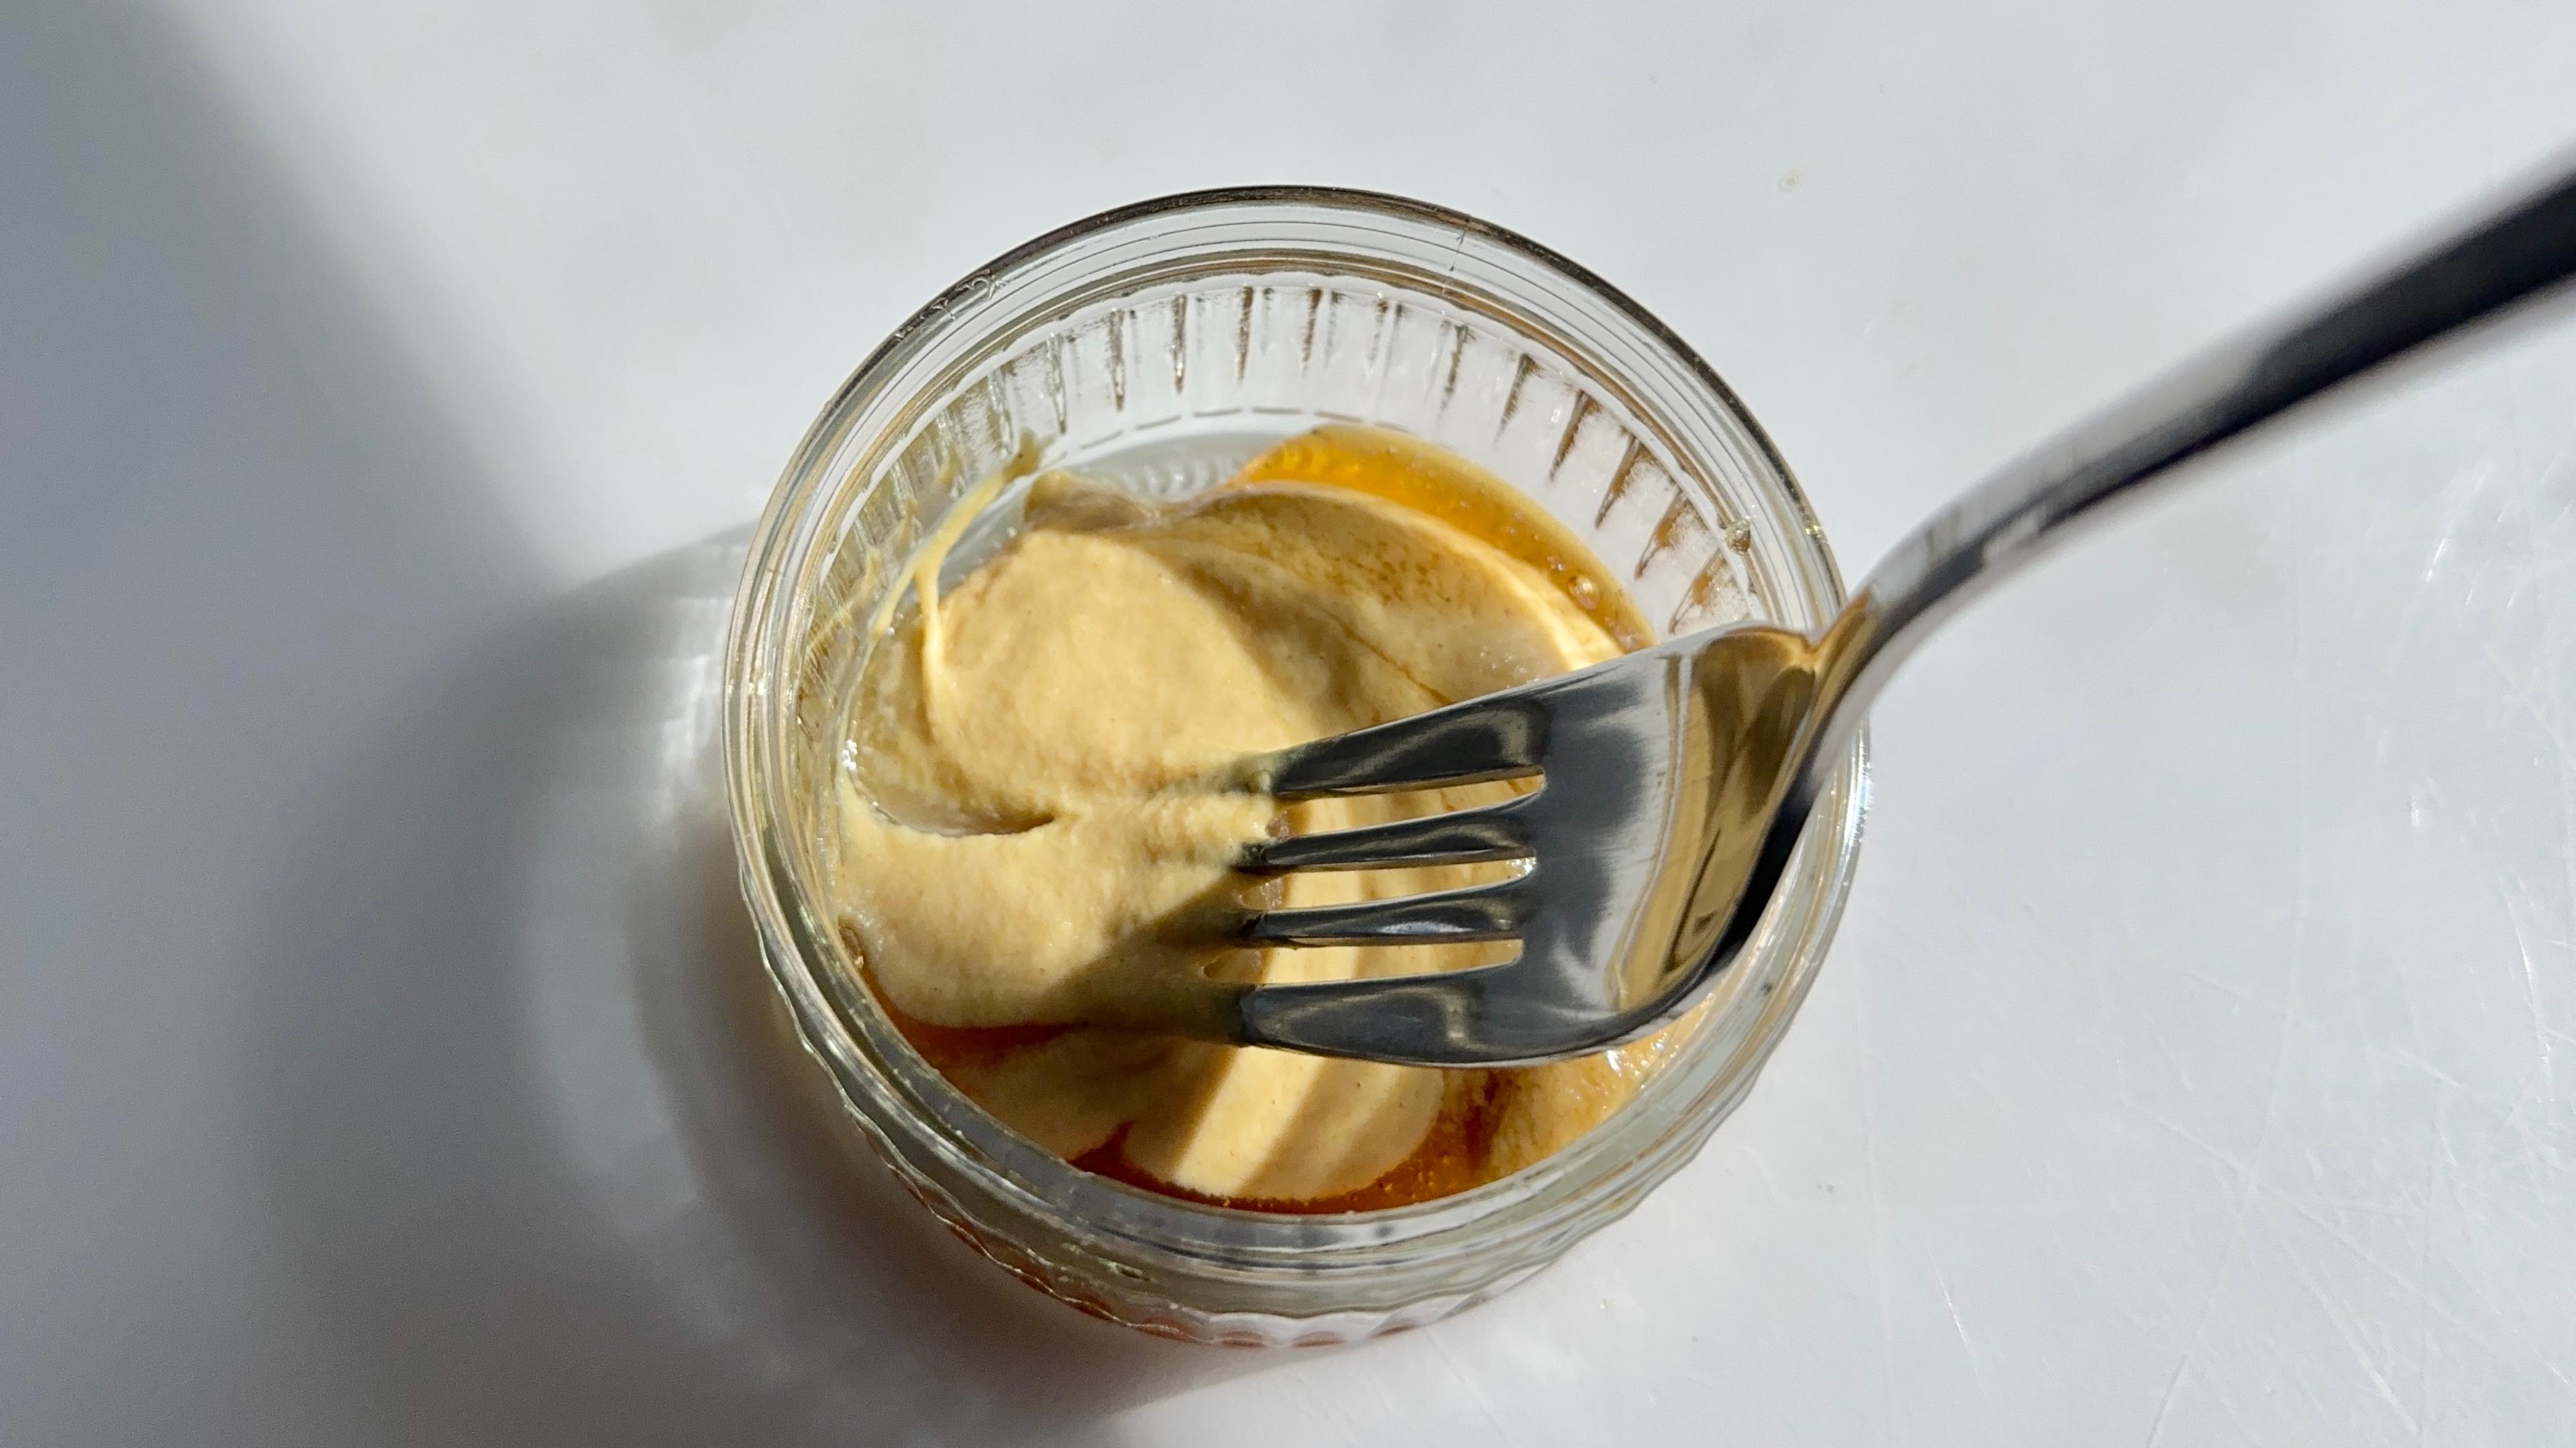 In a small bowl, combine Dijon mustard, honey, salt and pepper to taste and whisk.